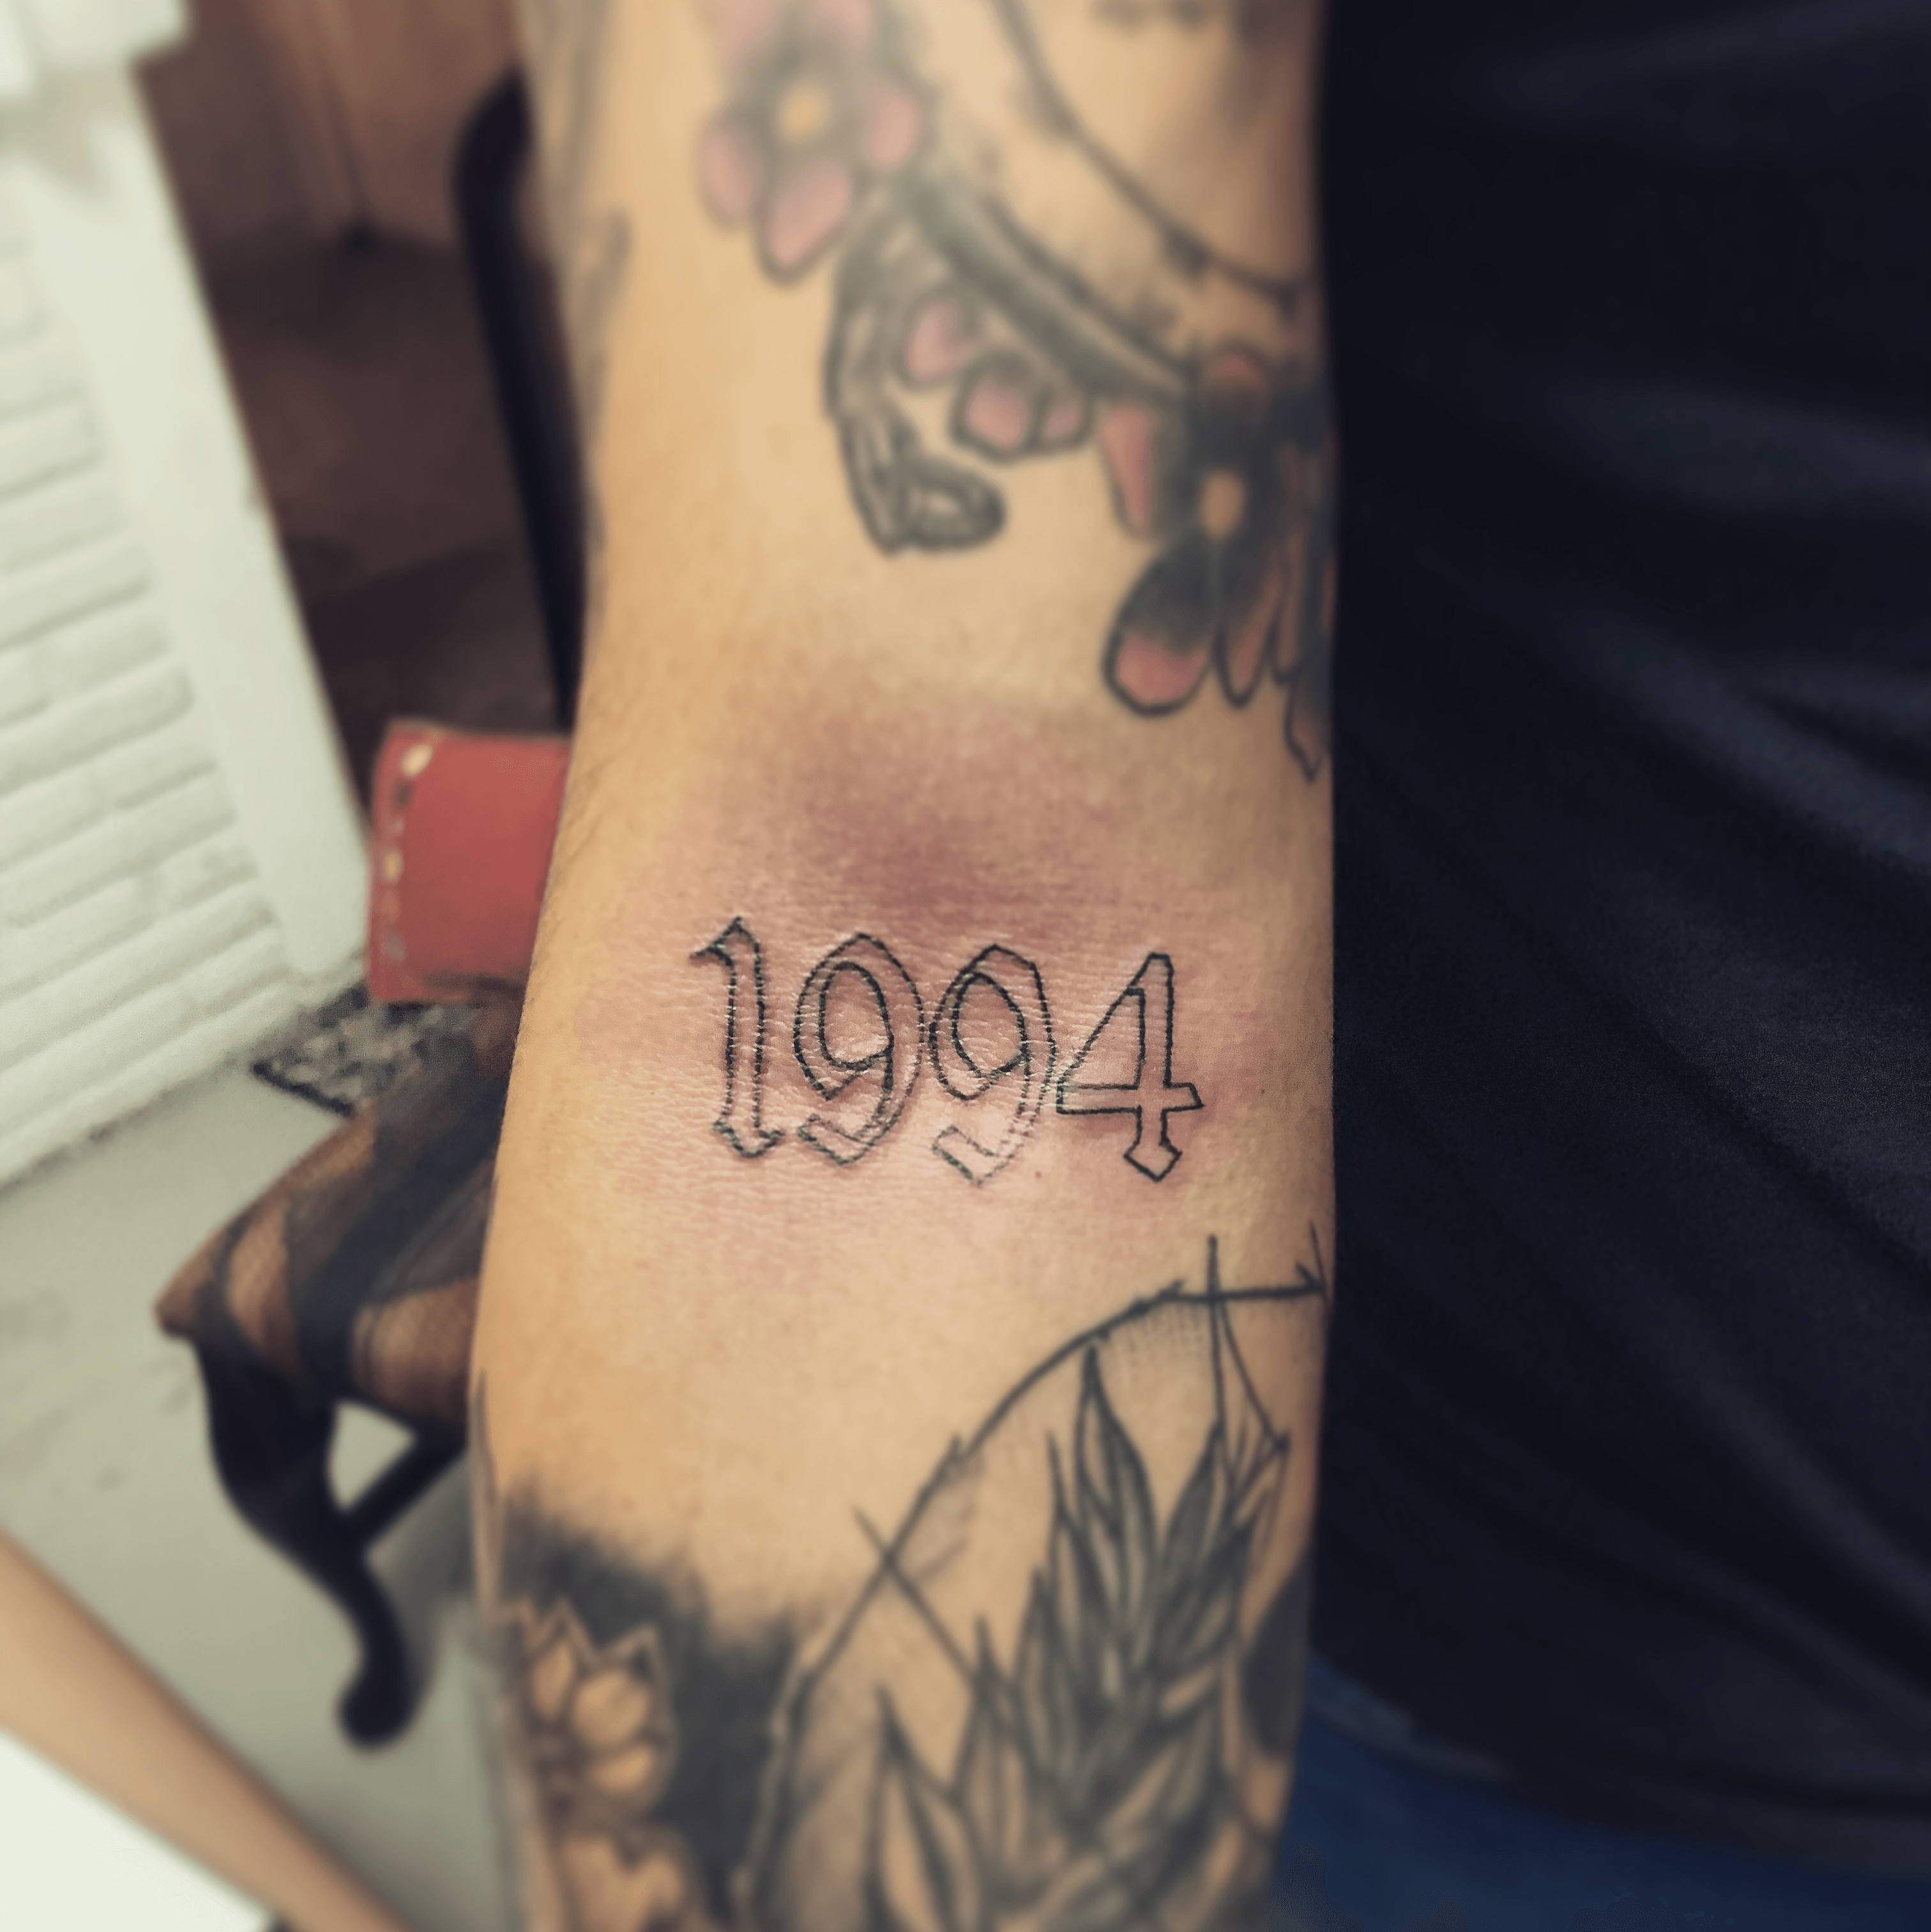 Large 1994 lettering tattoo located on the shin